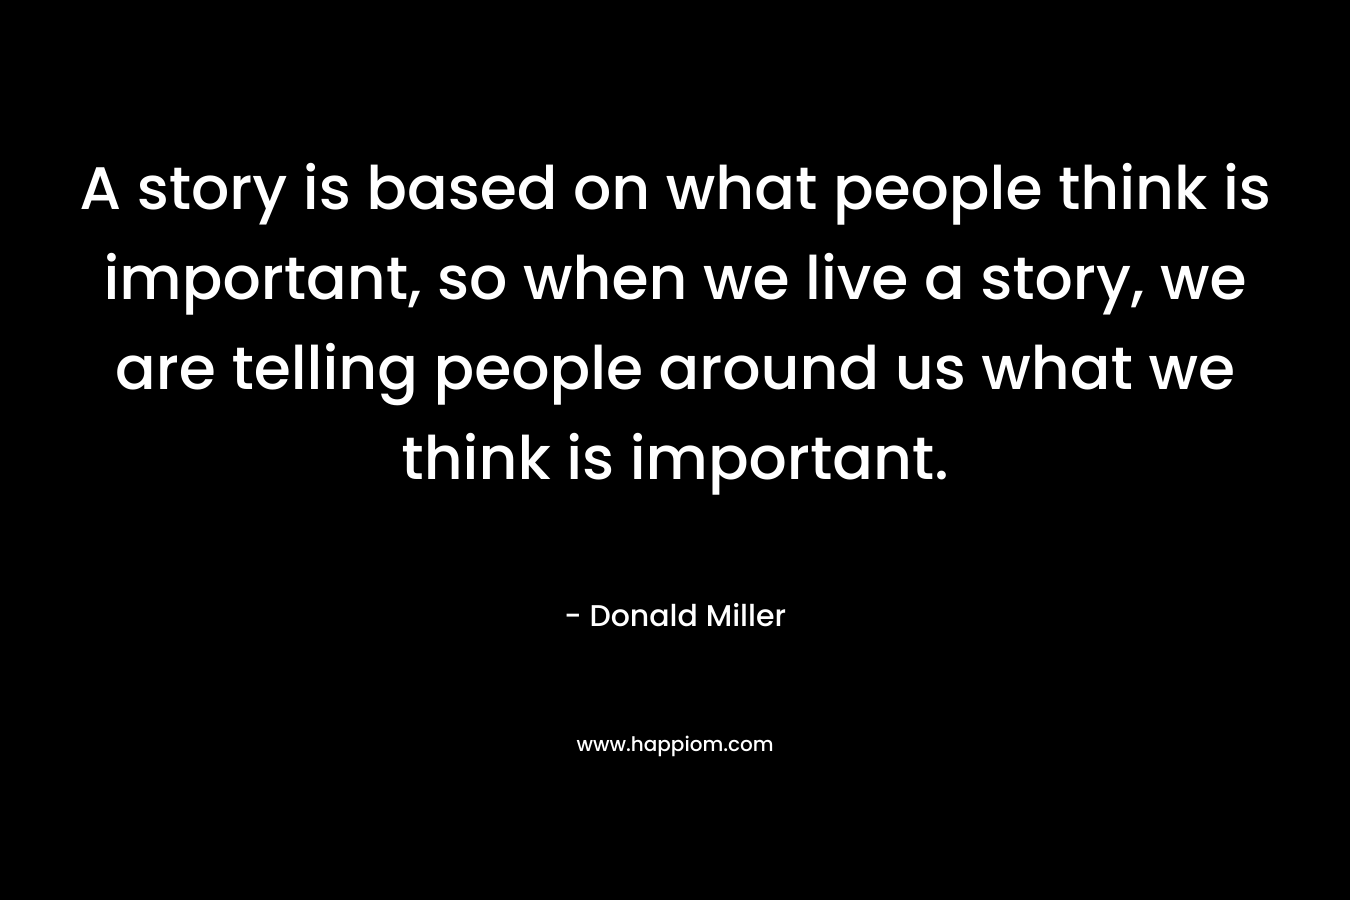 A story is based on what people think is important, so when we live a story, we are telling people around us what we think is important.